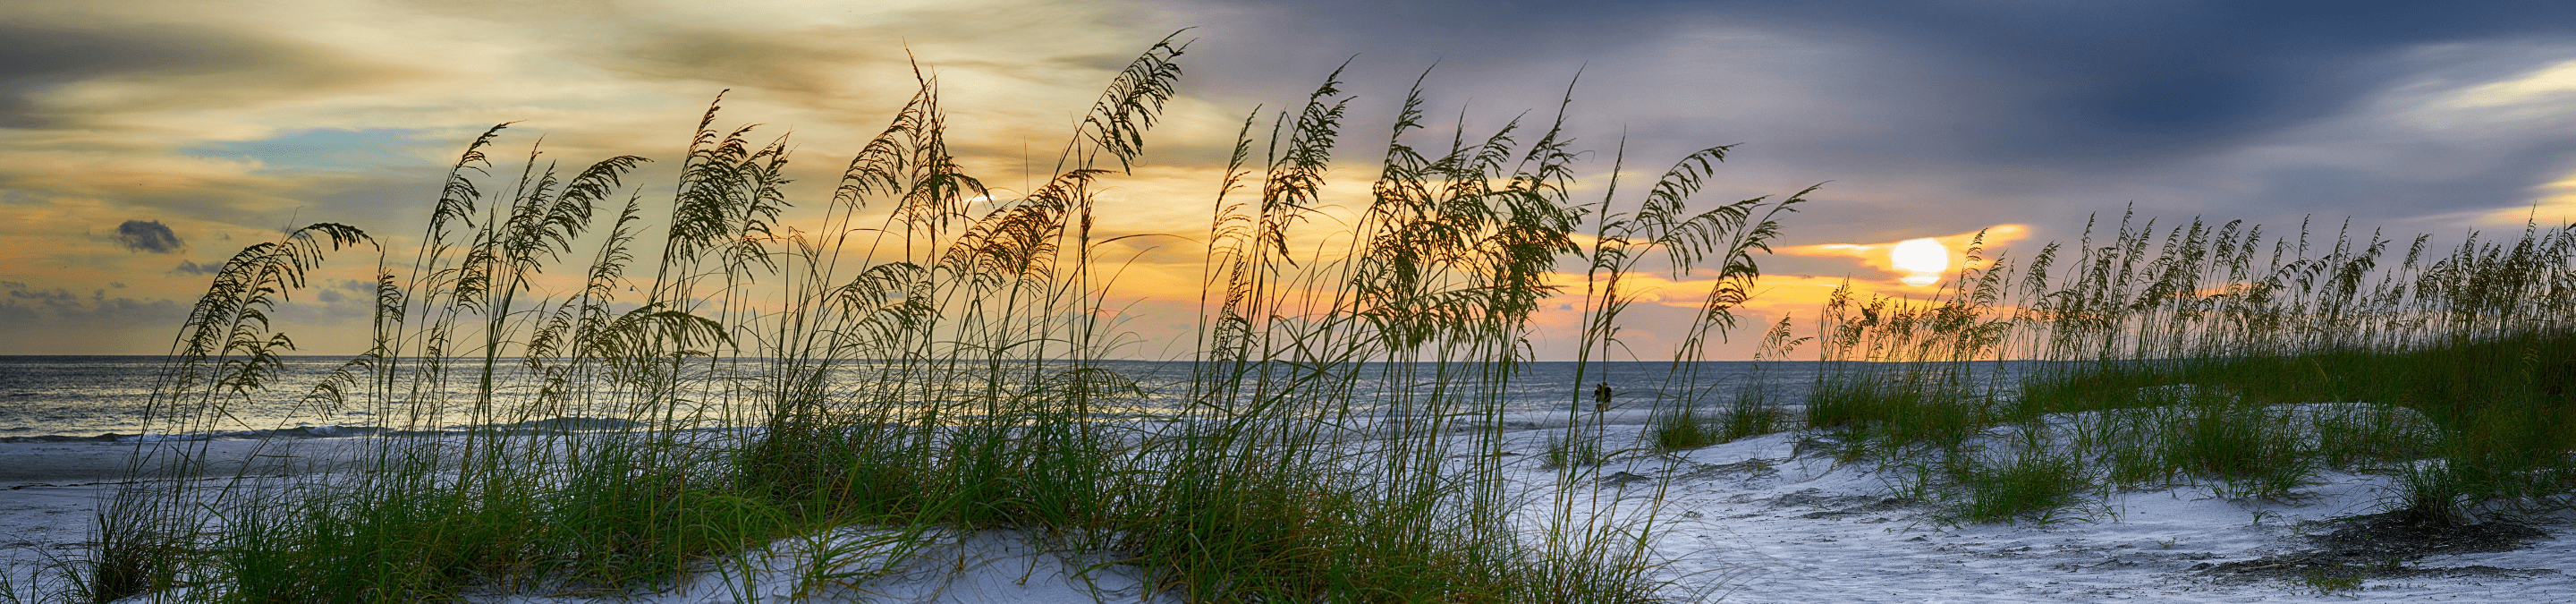 view through tall grass on sand dunes as the sun begins to set over the gulf of Mexico off the coast of Anna Maria Island